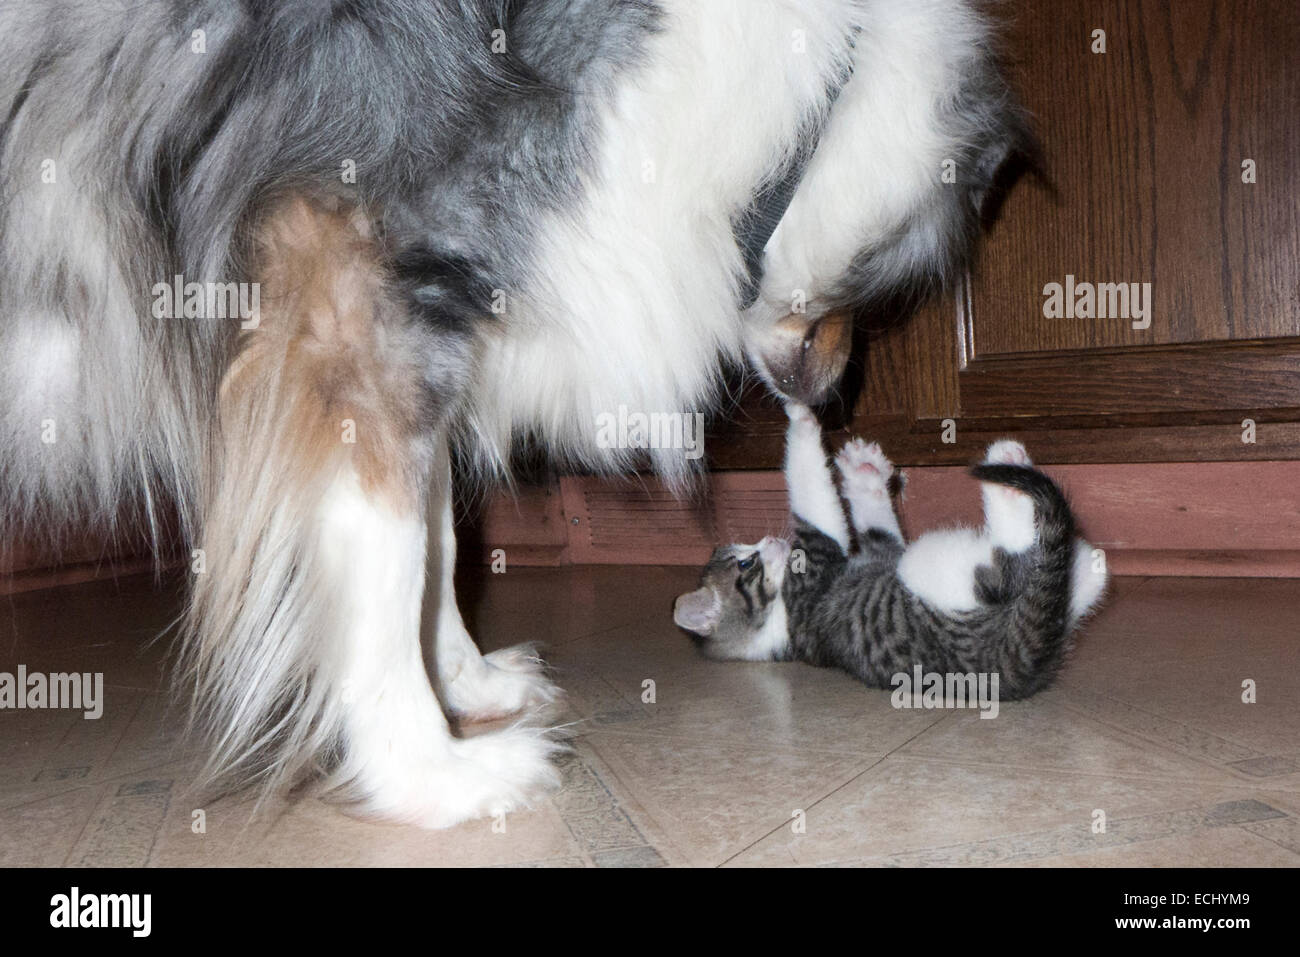 Kitten and dog making contact. Stock Photo